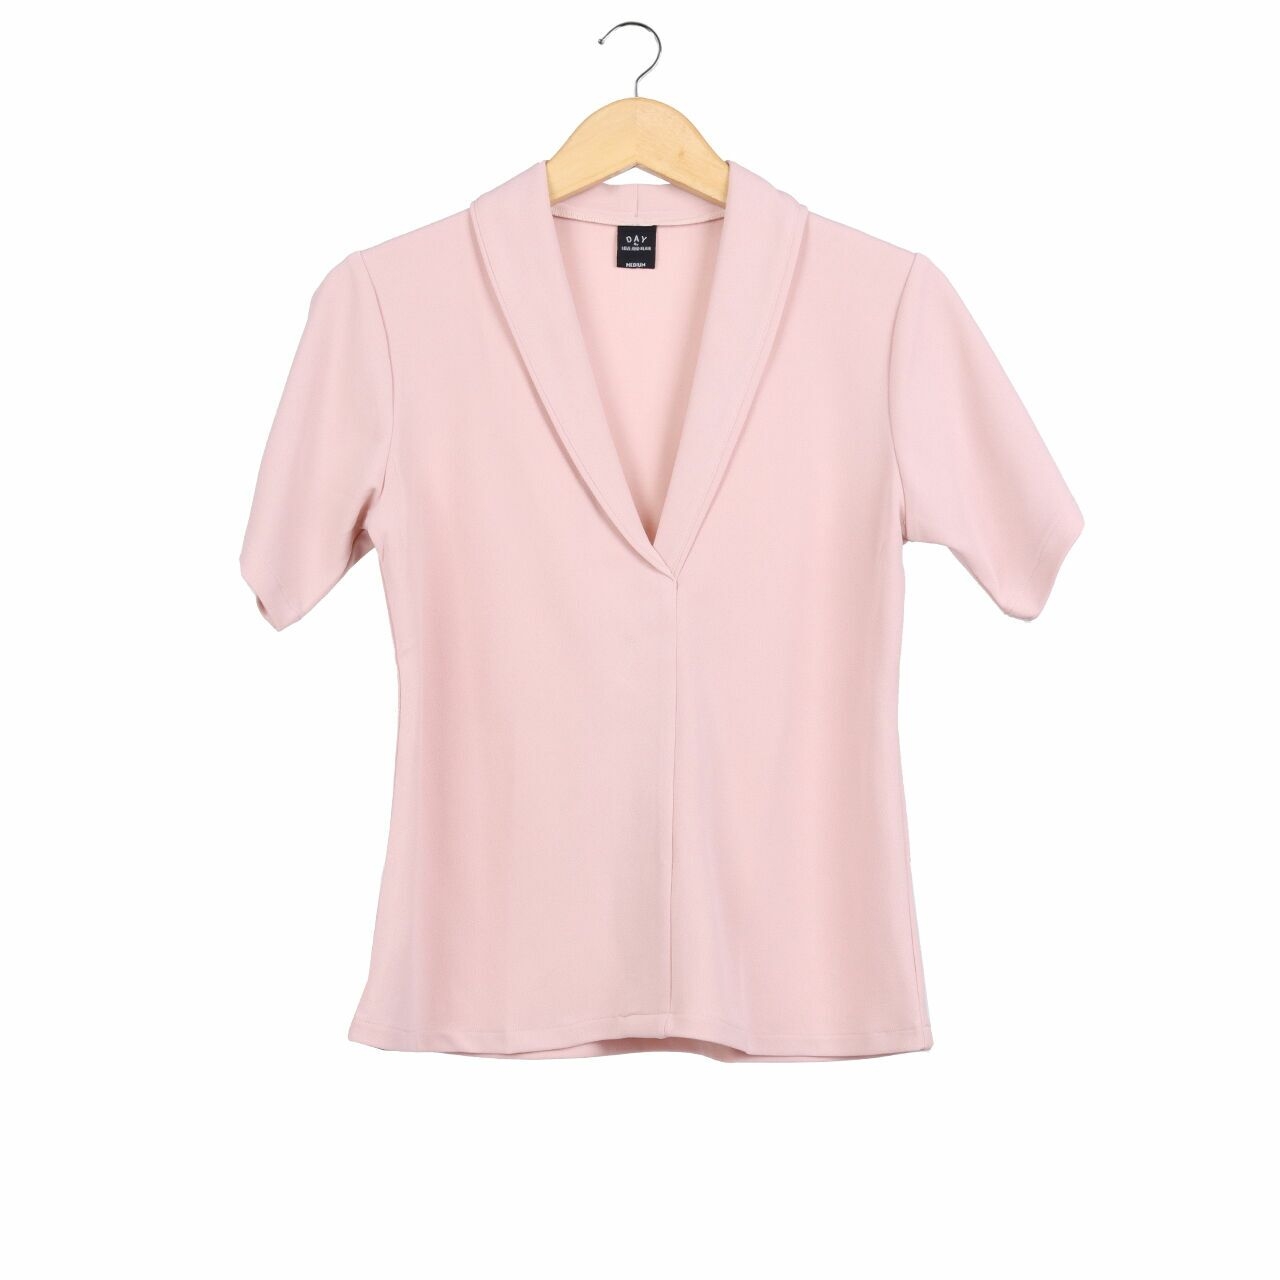 Day by Love And flair Soft Pink Blouse